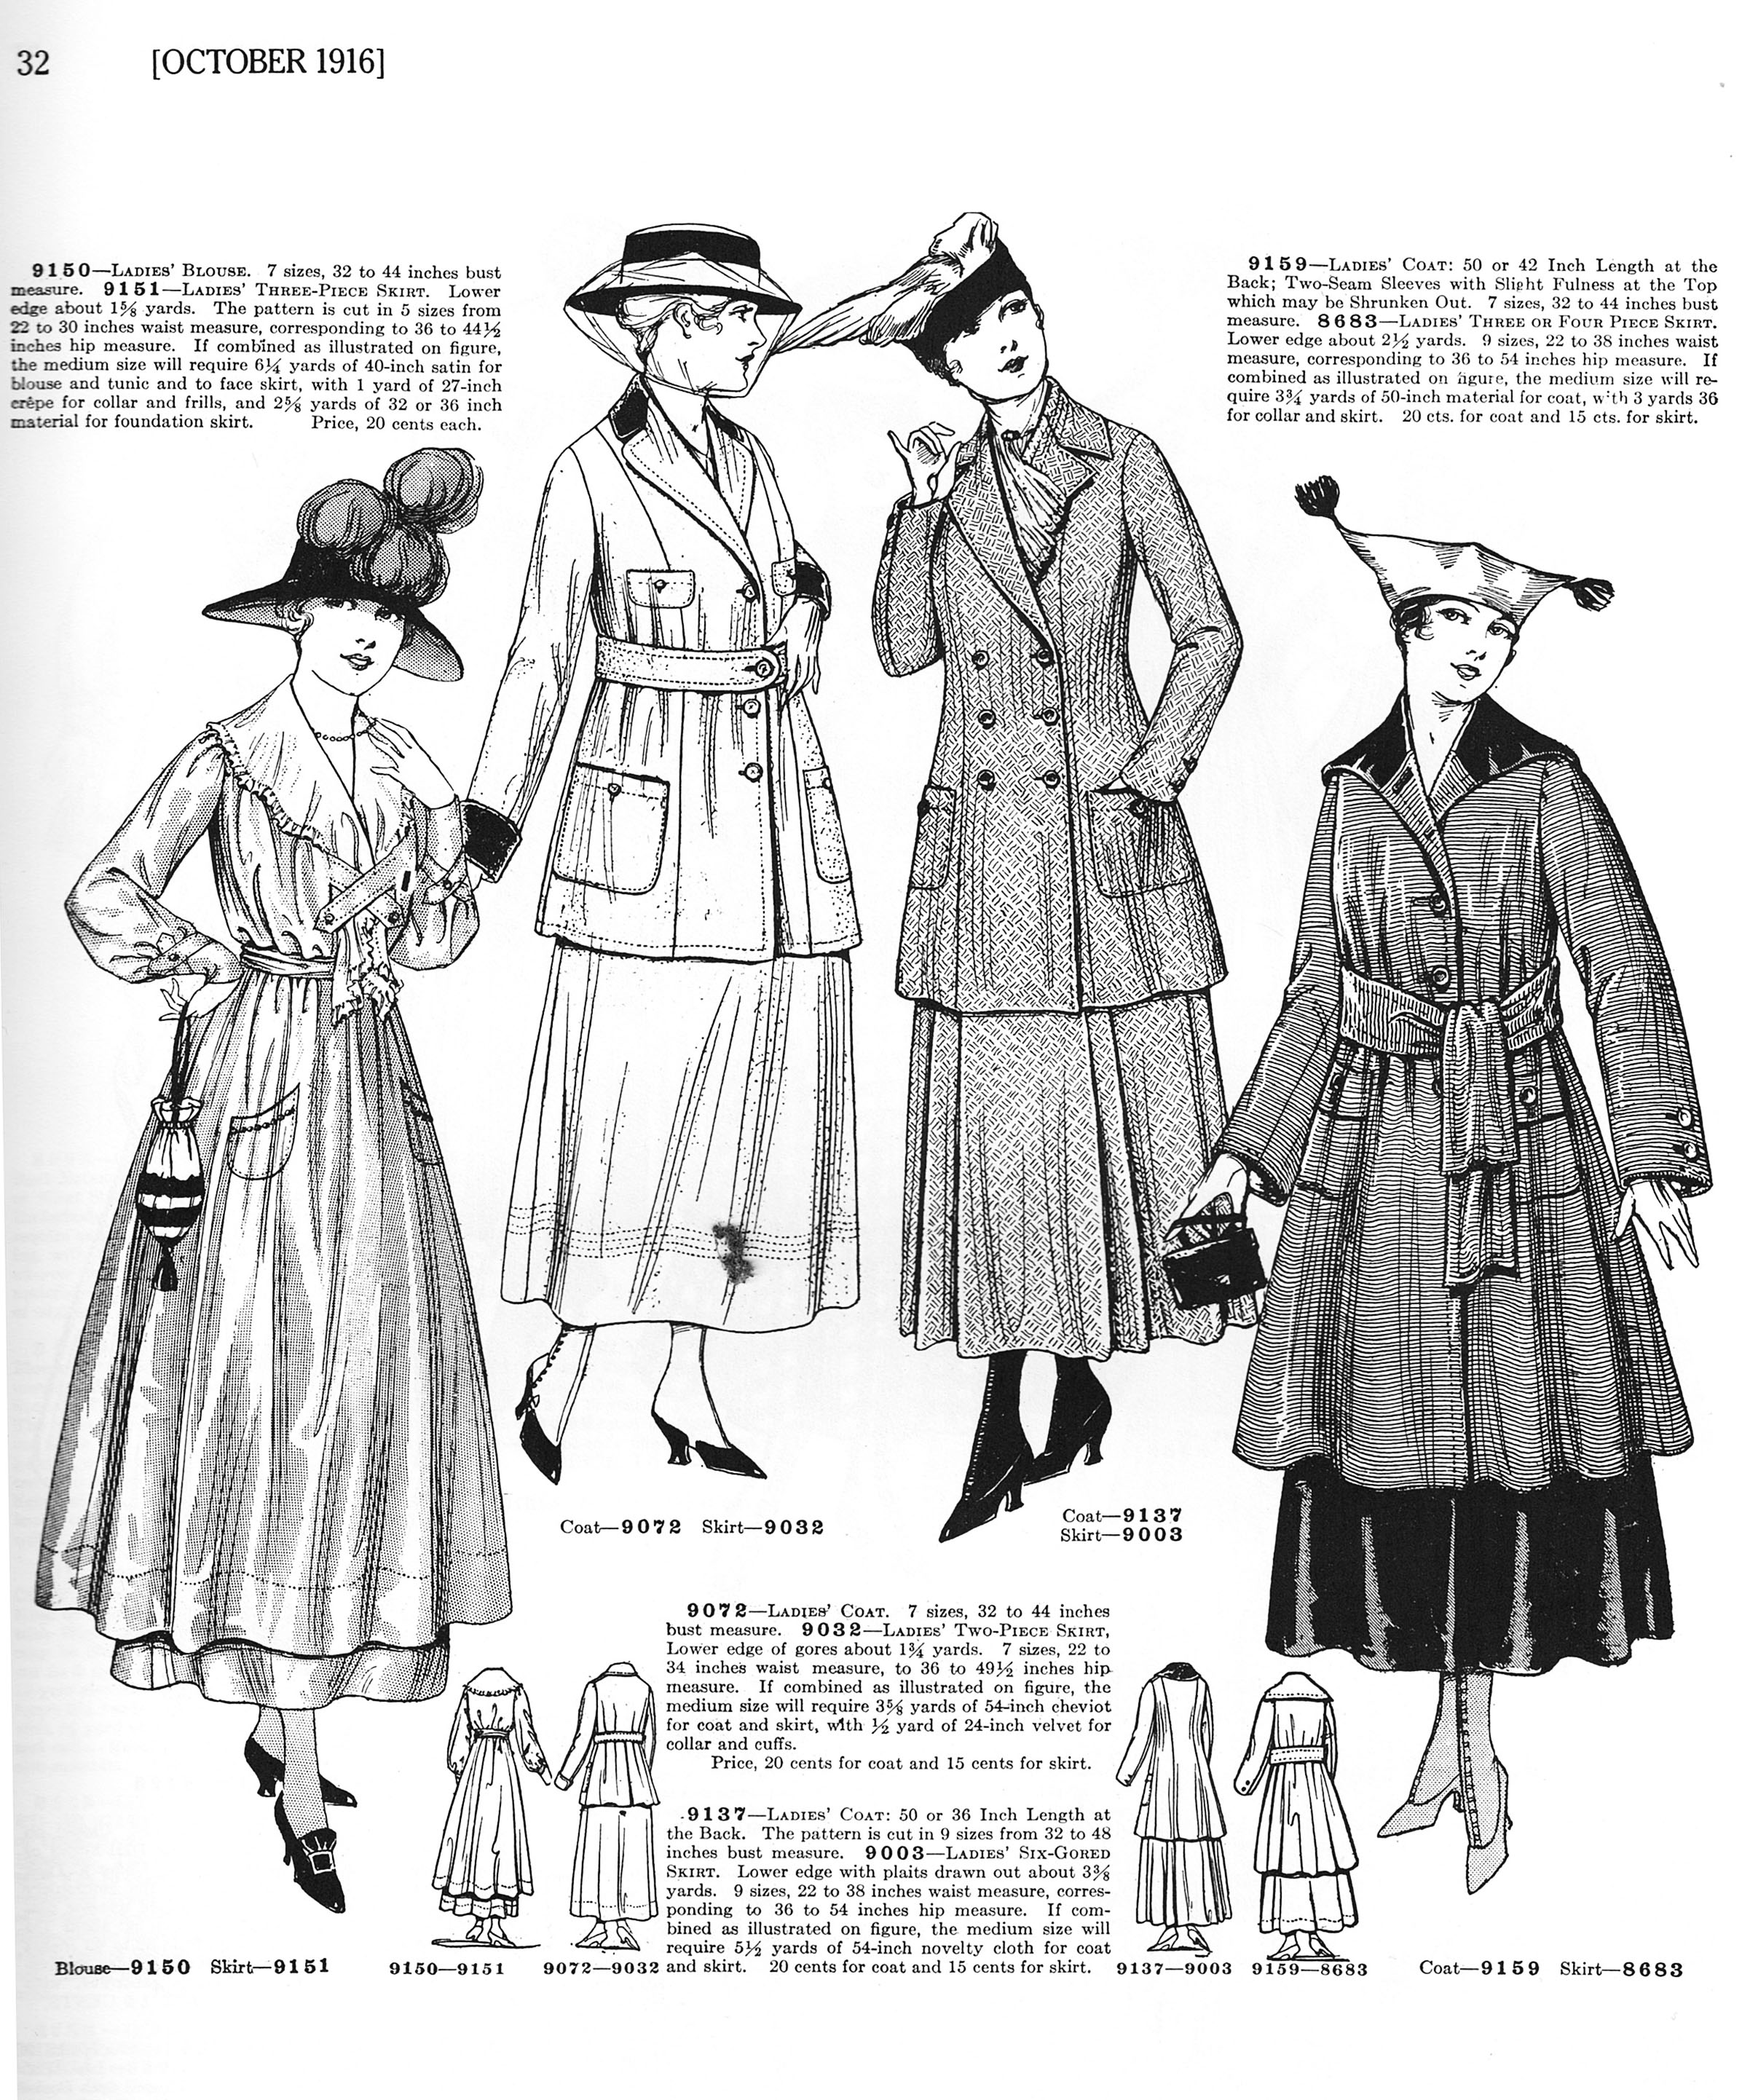 October 1916 Russell's Standard Fashions, publ. by Dover Press